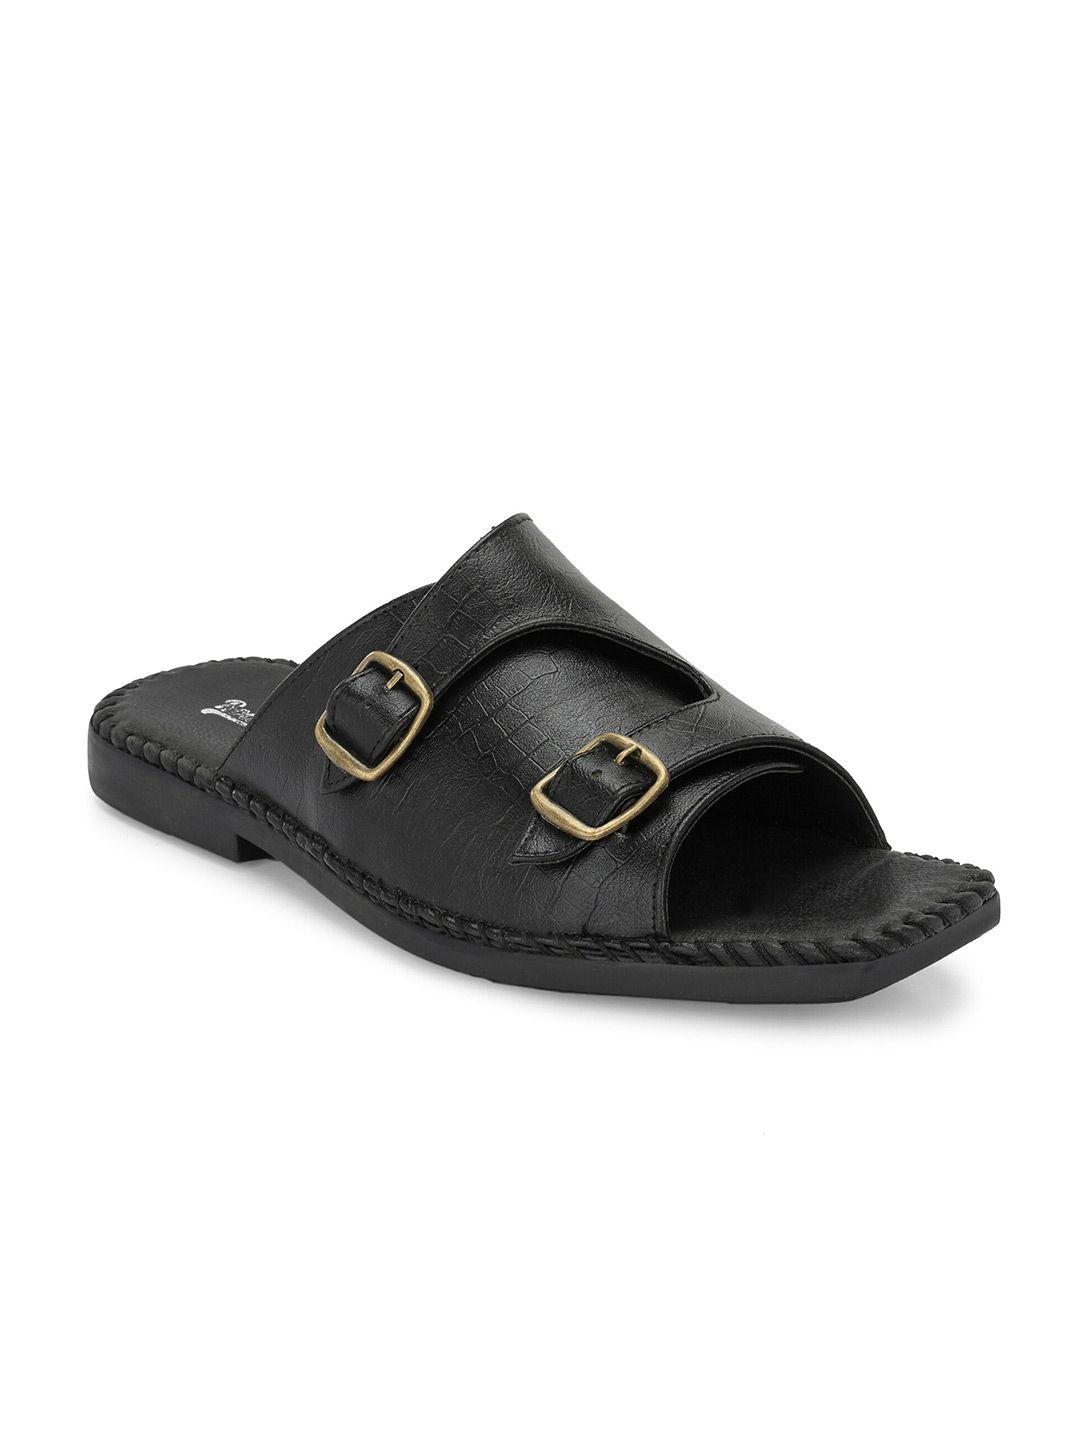 the roadster lifestyle co. men black slip-on comfort sandals with buckles